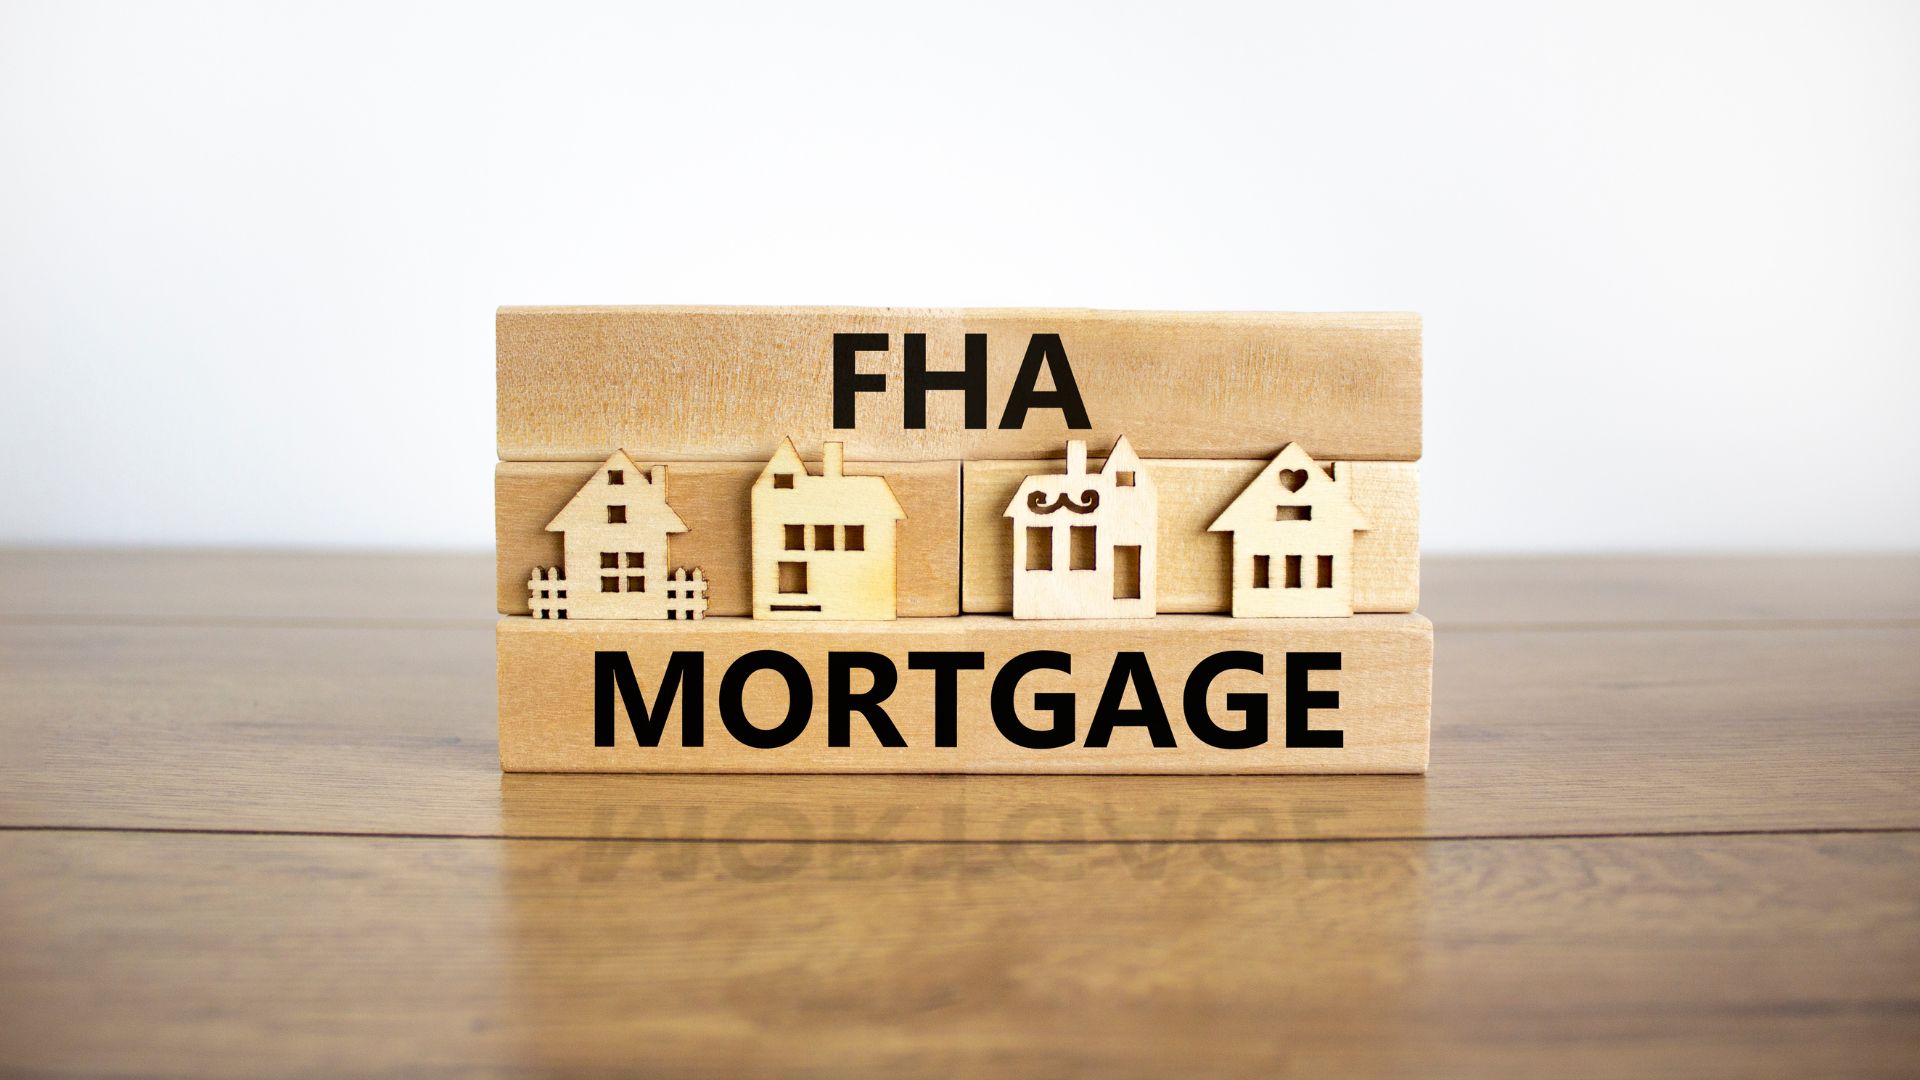 Understanding How Pre-Qualifying for an FHA Mortgage Loan